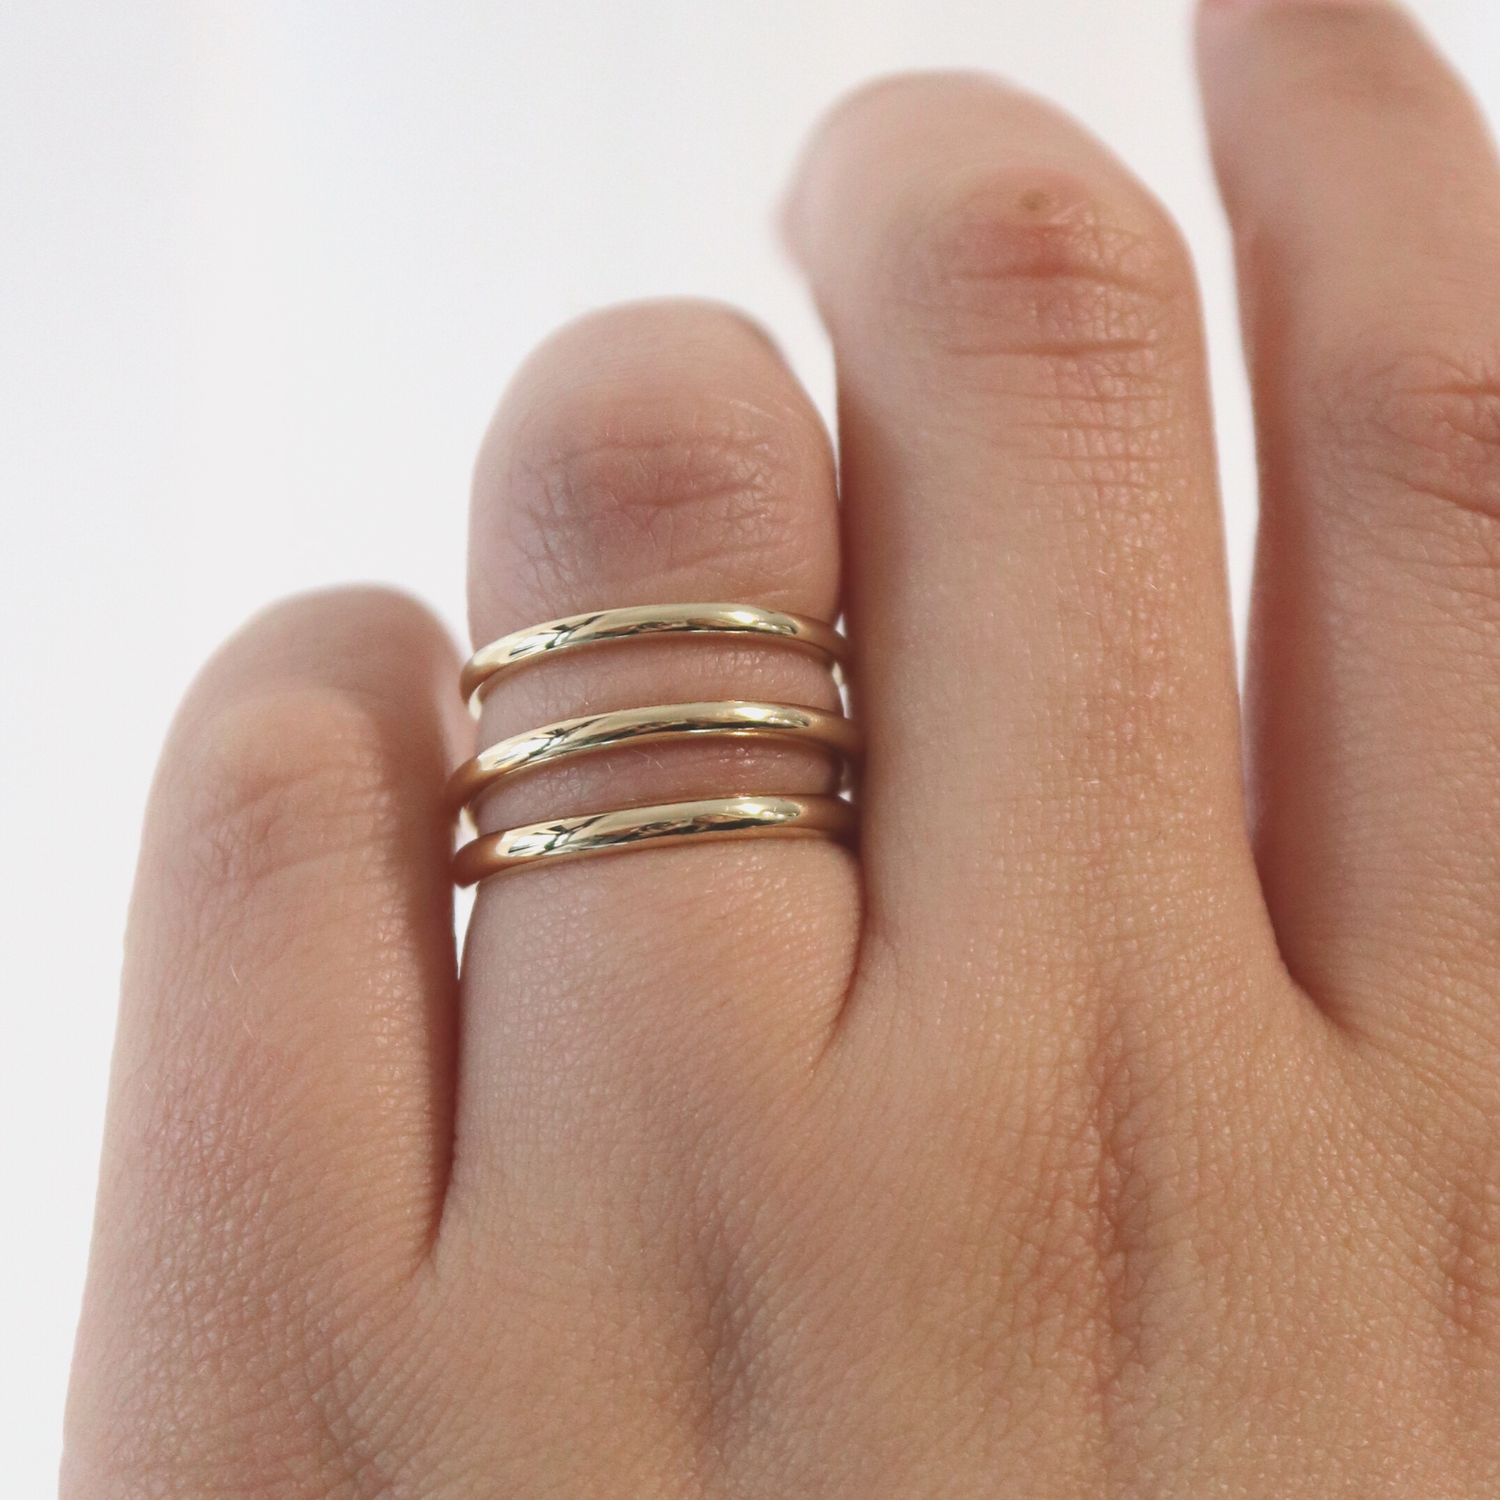 How to choose the Band Width of your ring